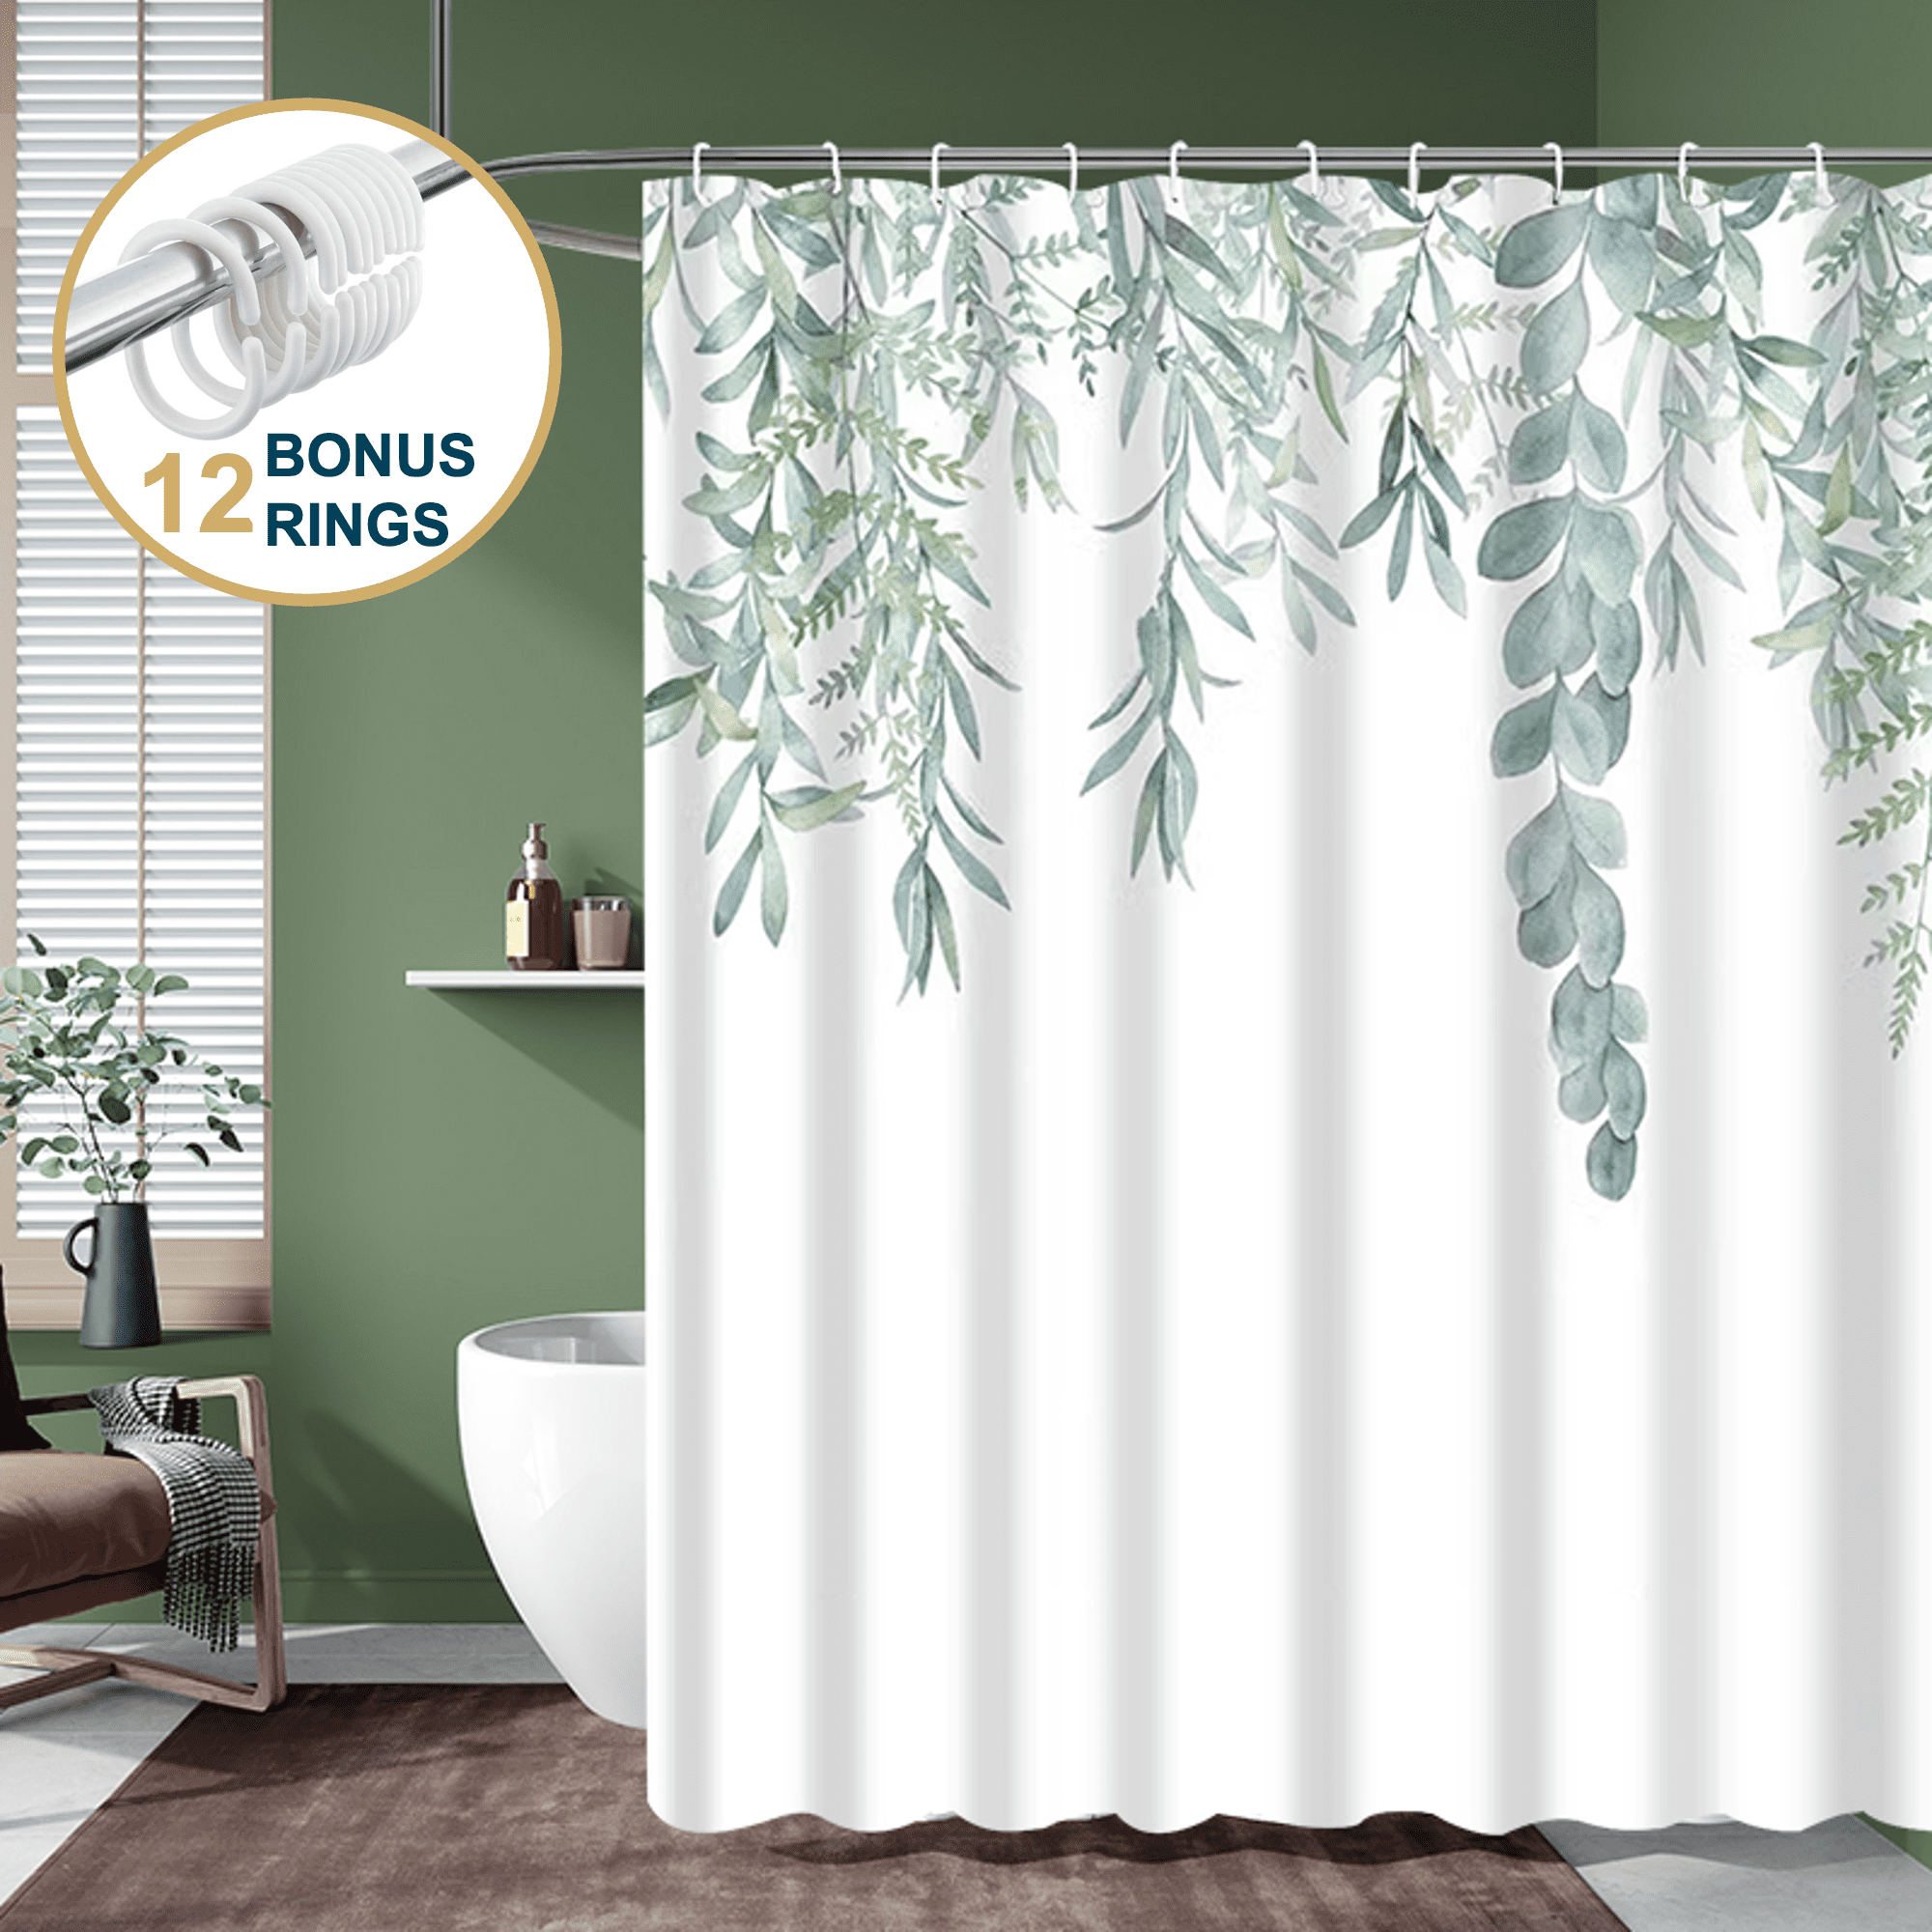 Comfitime Green Shower Curtain with Hooks Heavy-Duty Mold/Mildew-Resistant, Weighted-Hem Fabric Bathroom Curtain, Water-Repellent, Machine-Washable